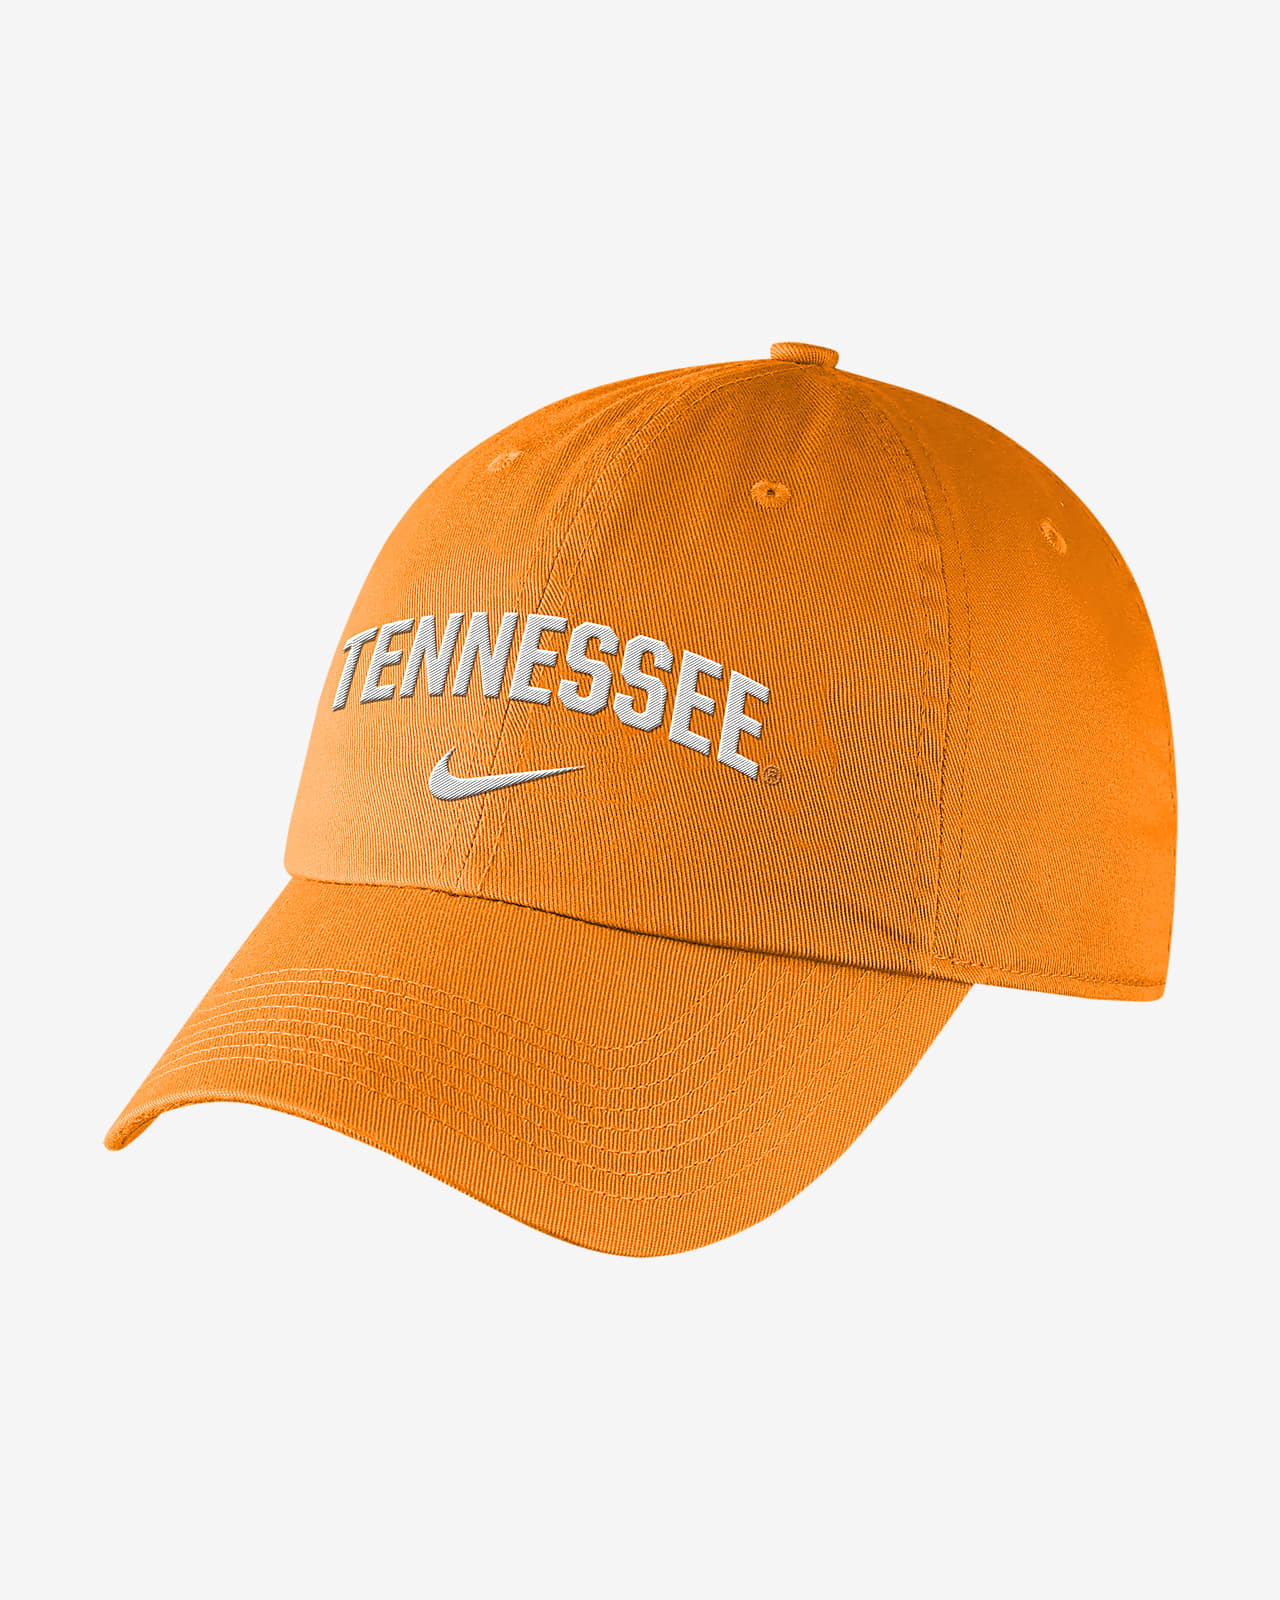 Nike College (Tennessee) Hat